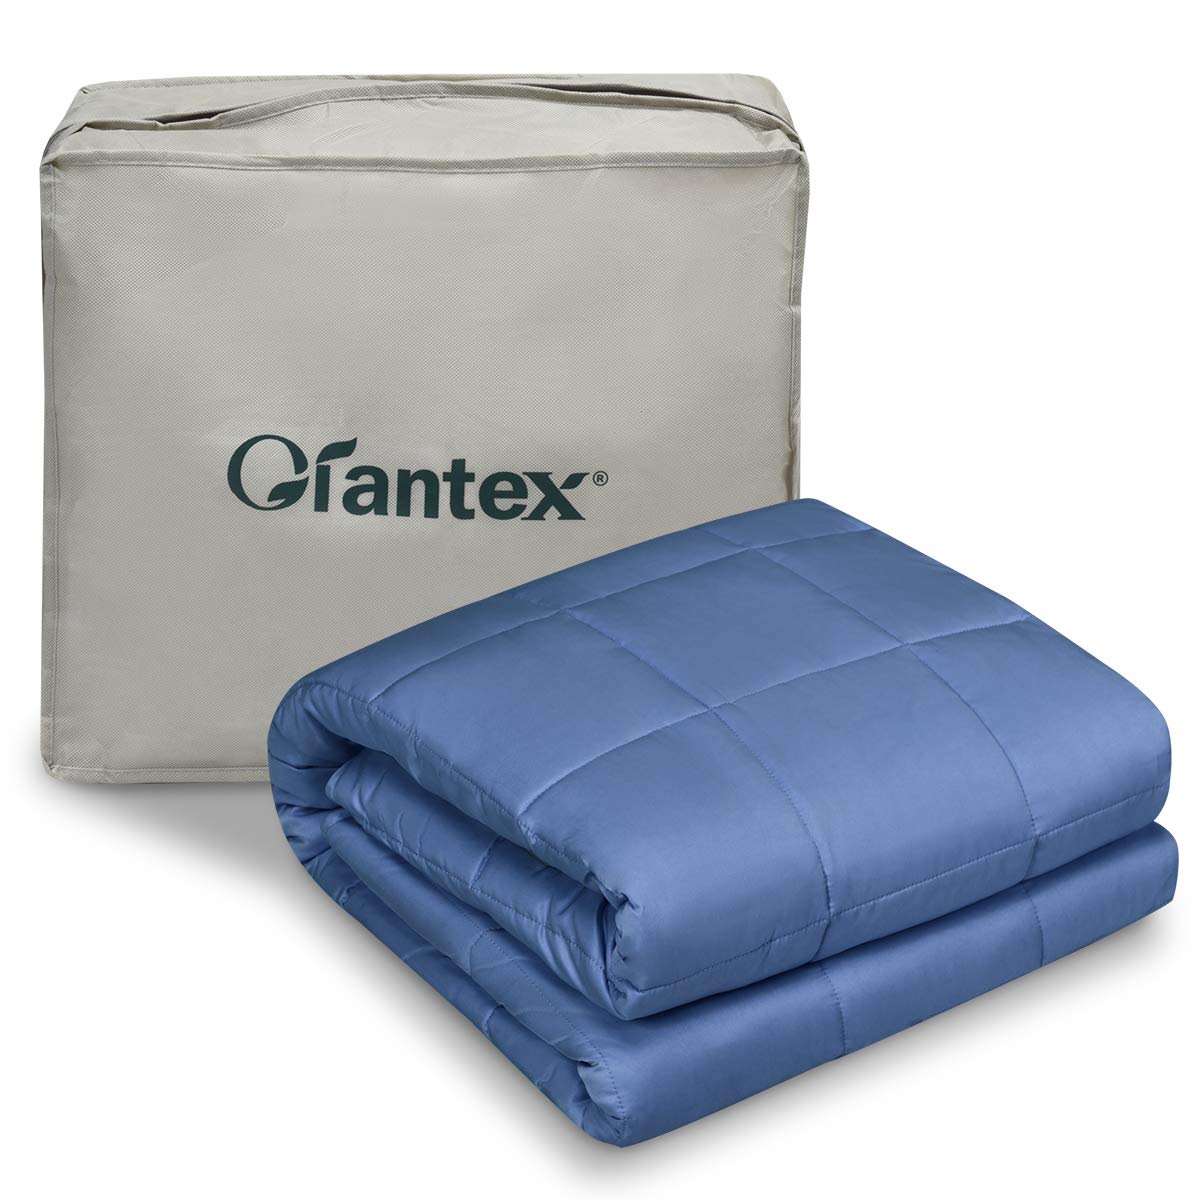 Giantex Cooling Weighted Blanket for Adults 20lbs |60"x 80" | Queen Size